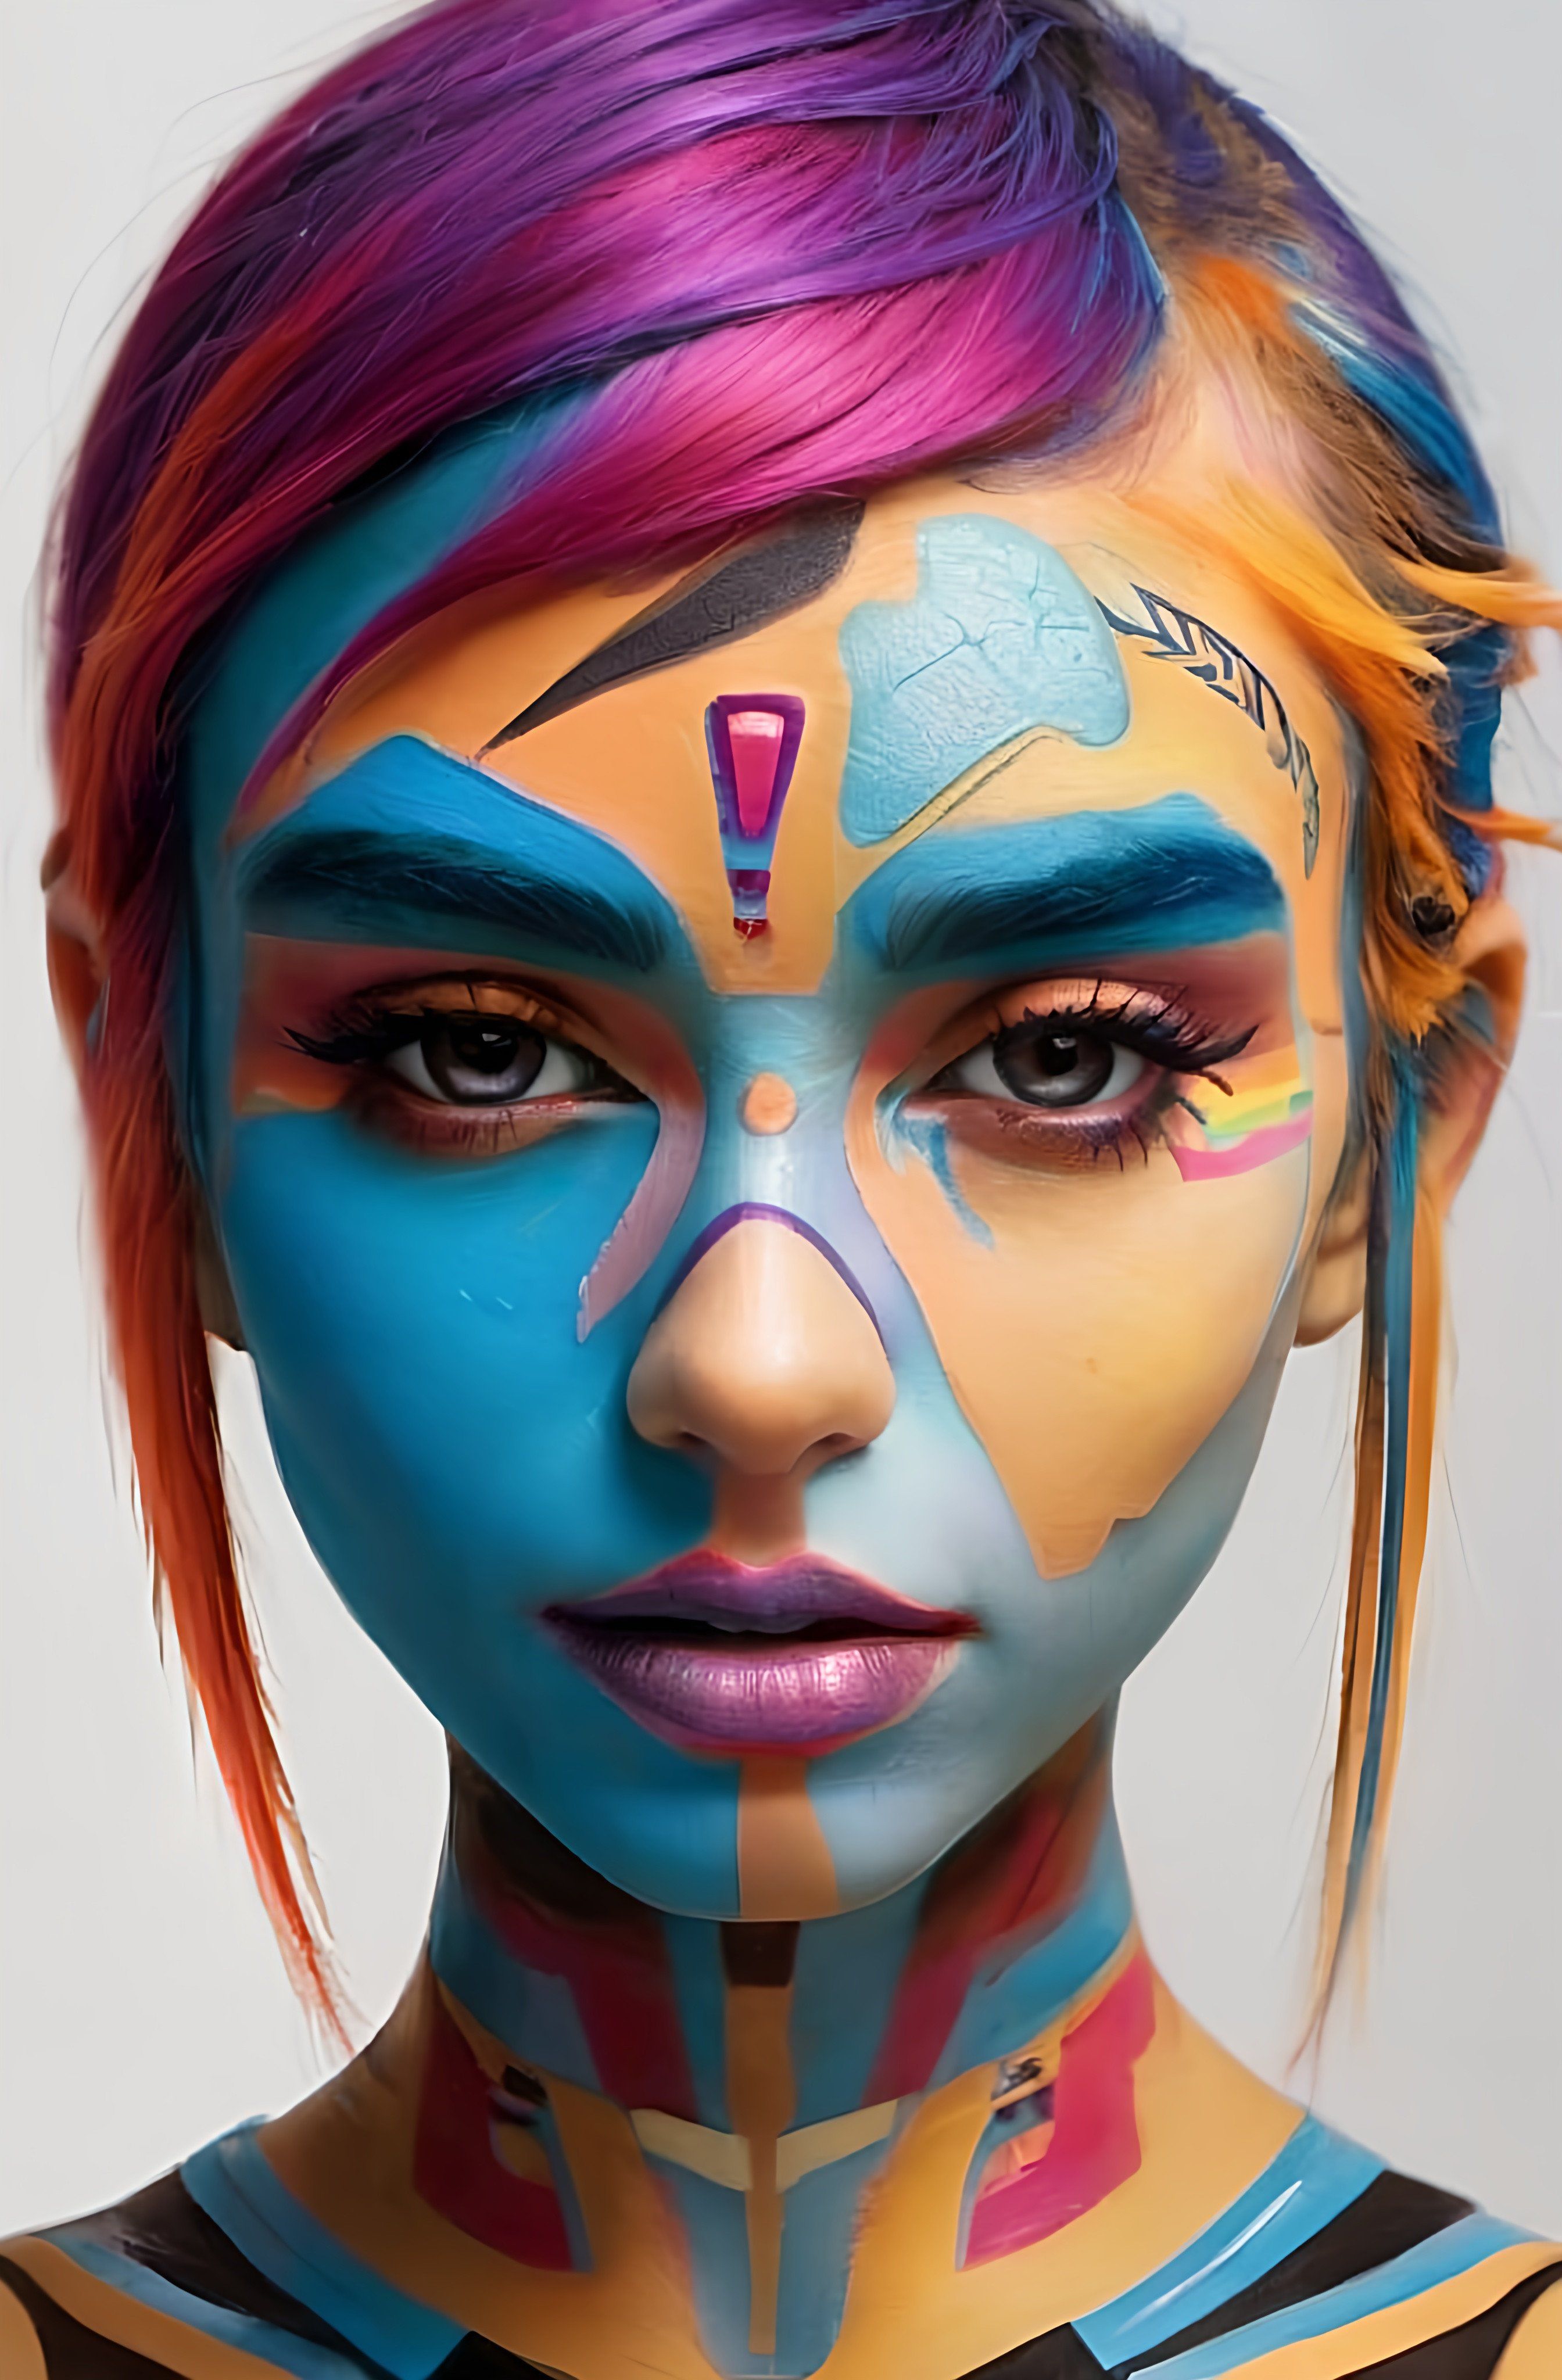 Prompt: a woman with colorful makeup and makeup art on her face and face paint on her face and chest, a pop art painting